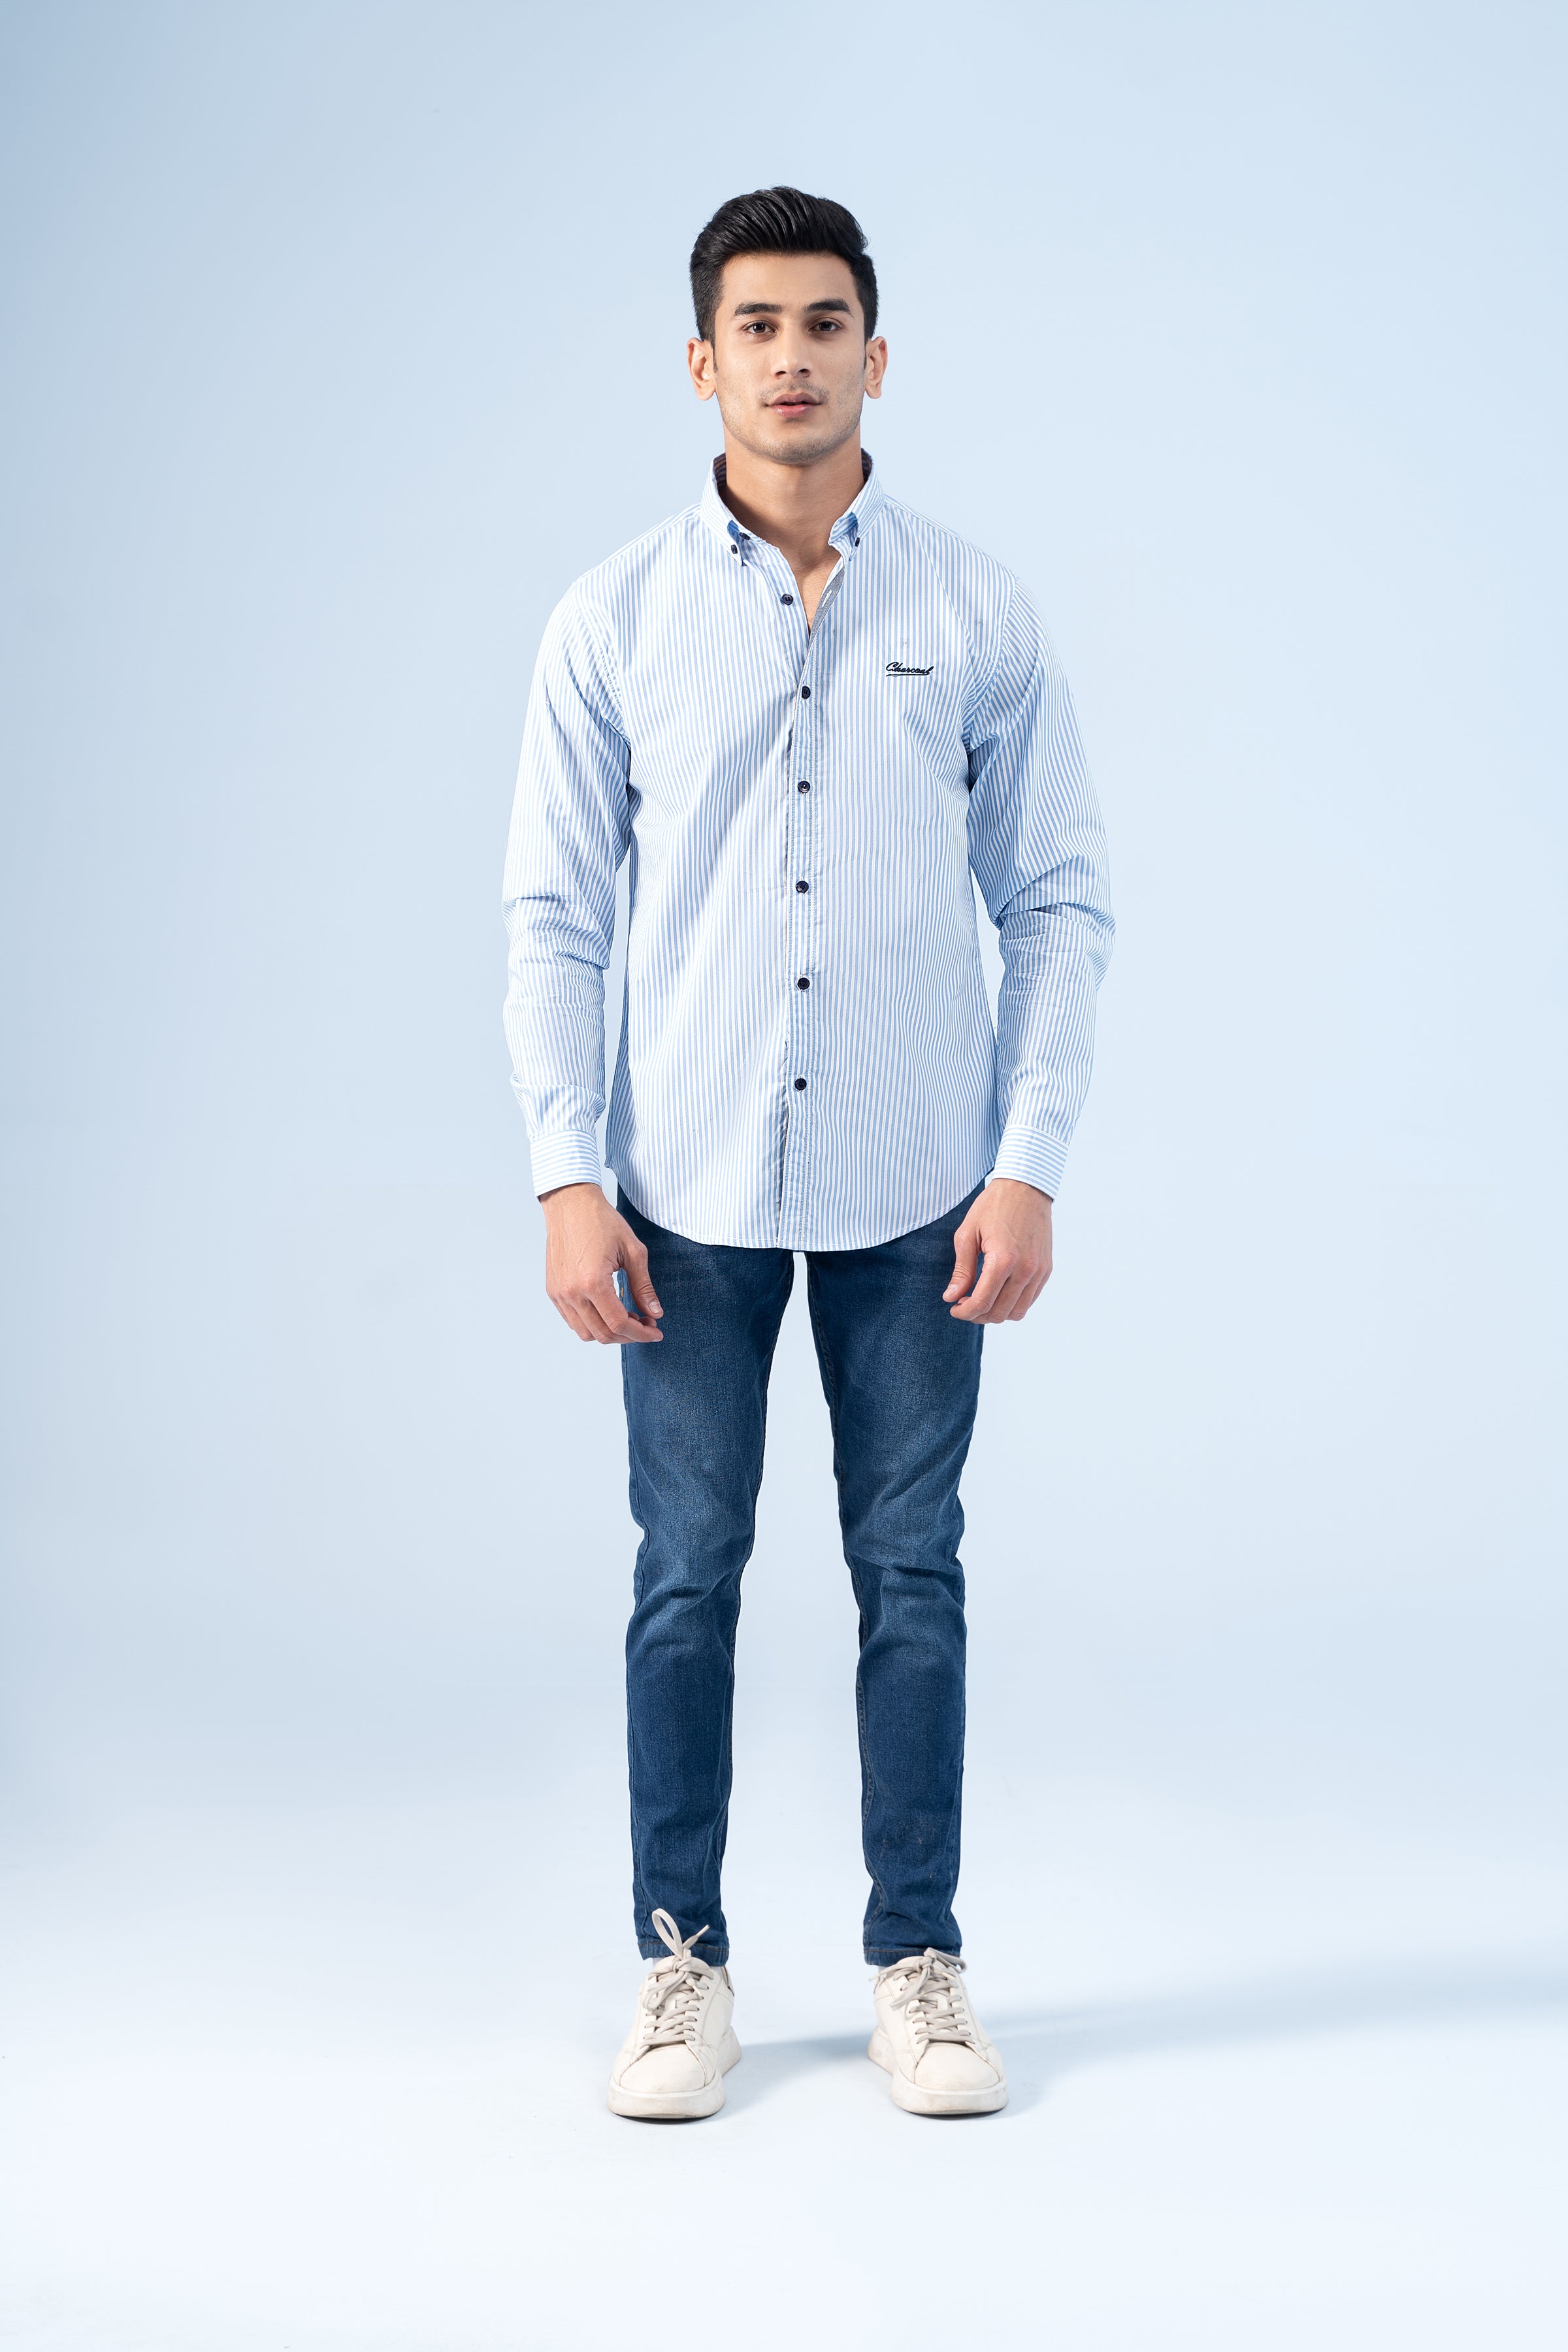 CASUAL SHIRT SKY LINING - Charcoal Clothing